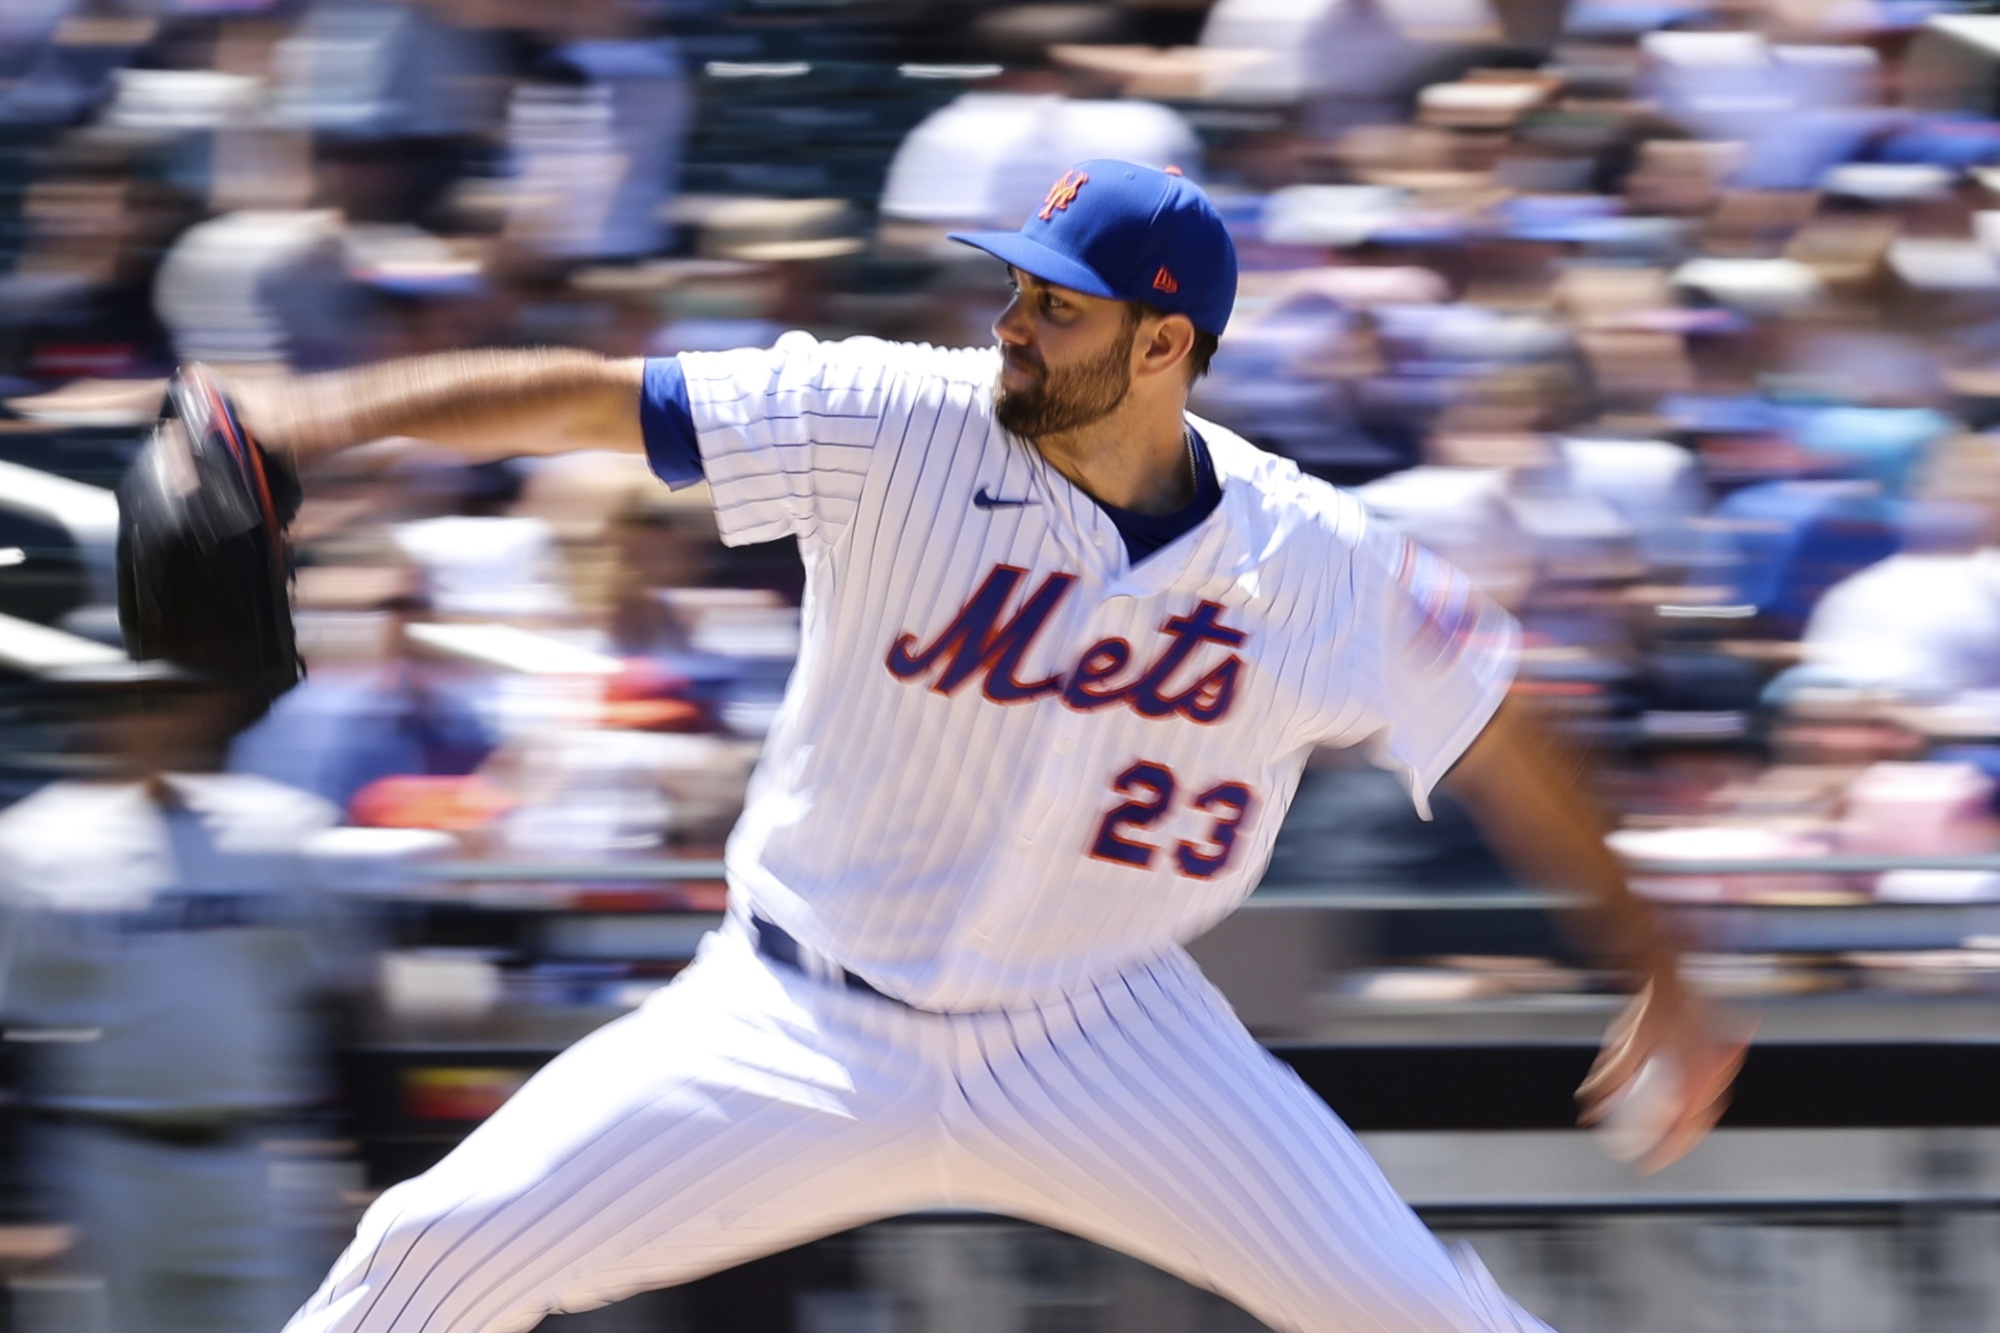 Mets to wear black jerseys on July 30 and remaining Friday night home games  - Amazin' Avenue